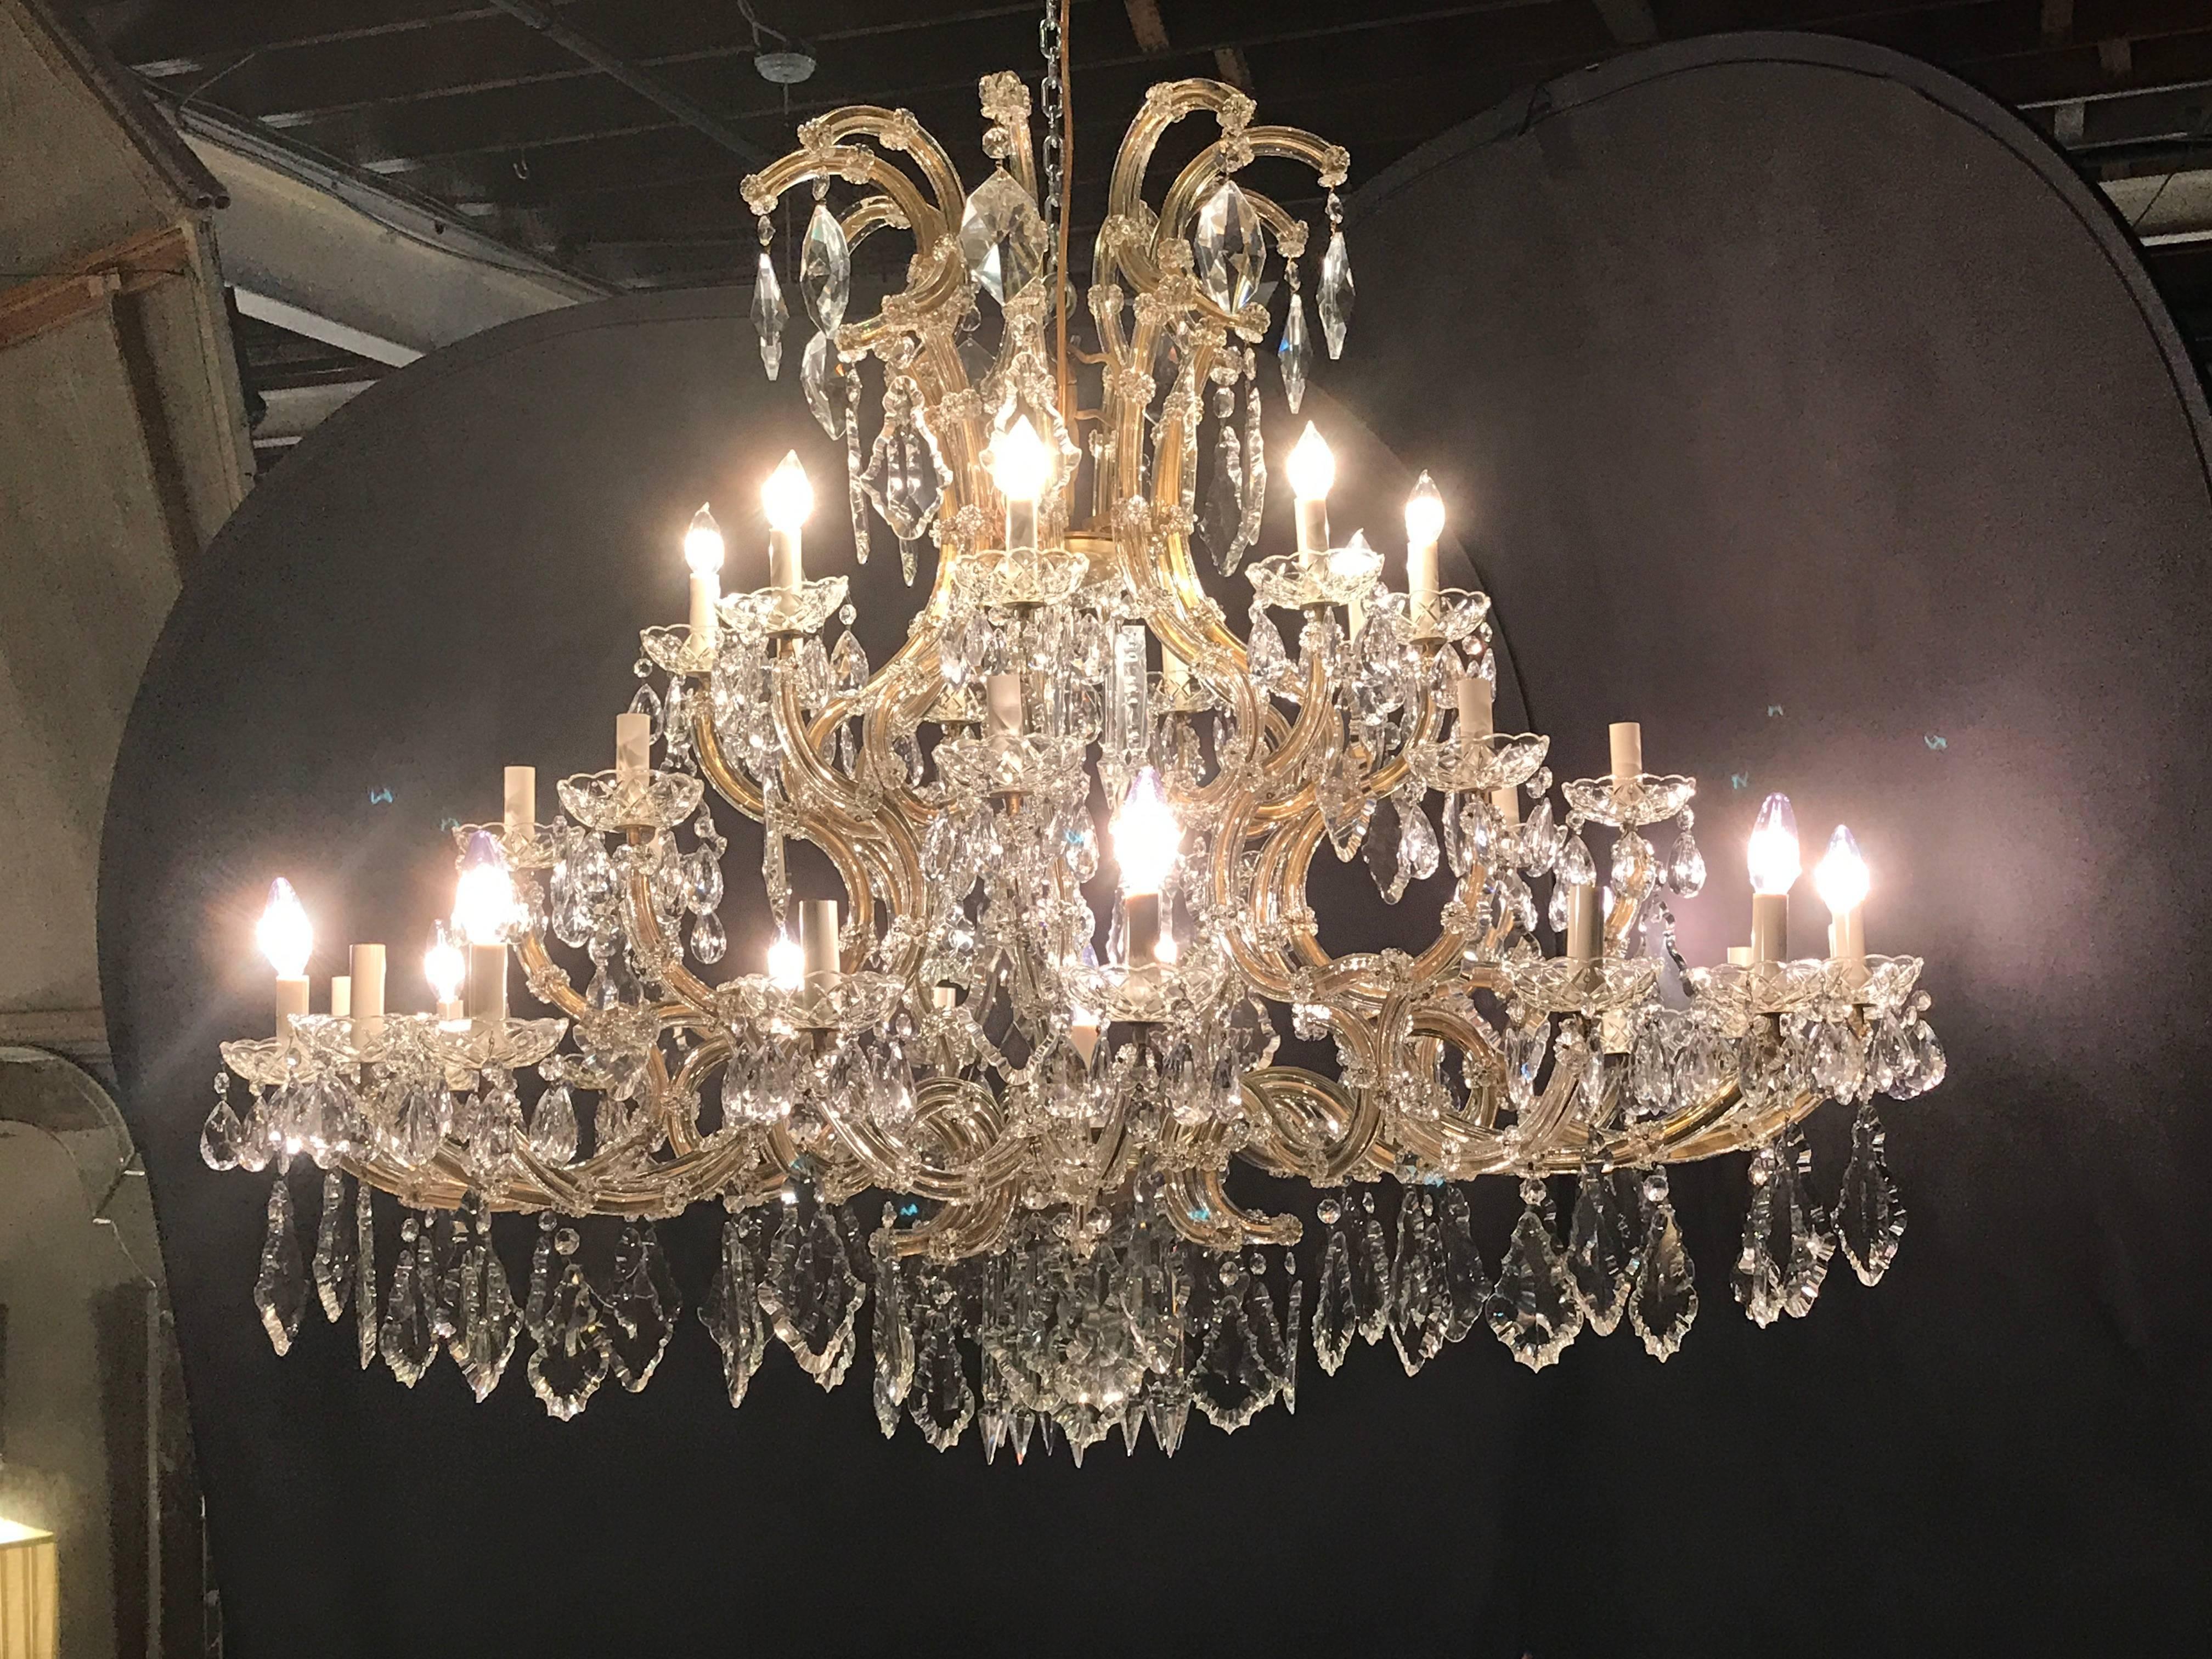 Monumental antique Venetian chandelier having 41 lights. This palatial chandelier is sure to light up any foyer or dining table that can withstand the grander of the size, late 19th or early 20th century chandelier is in very nice condition with